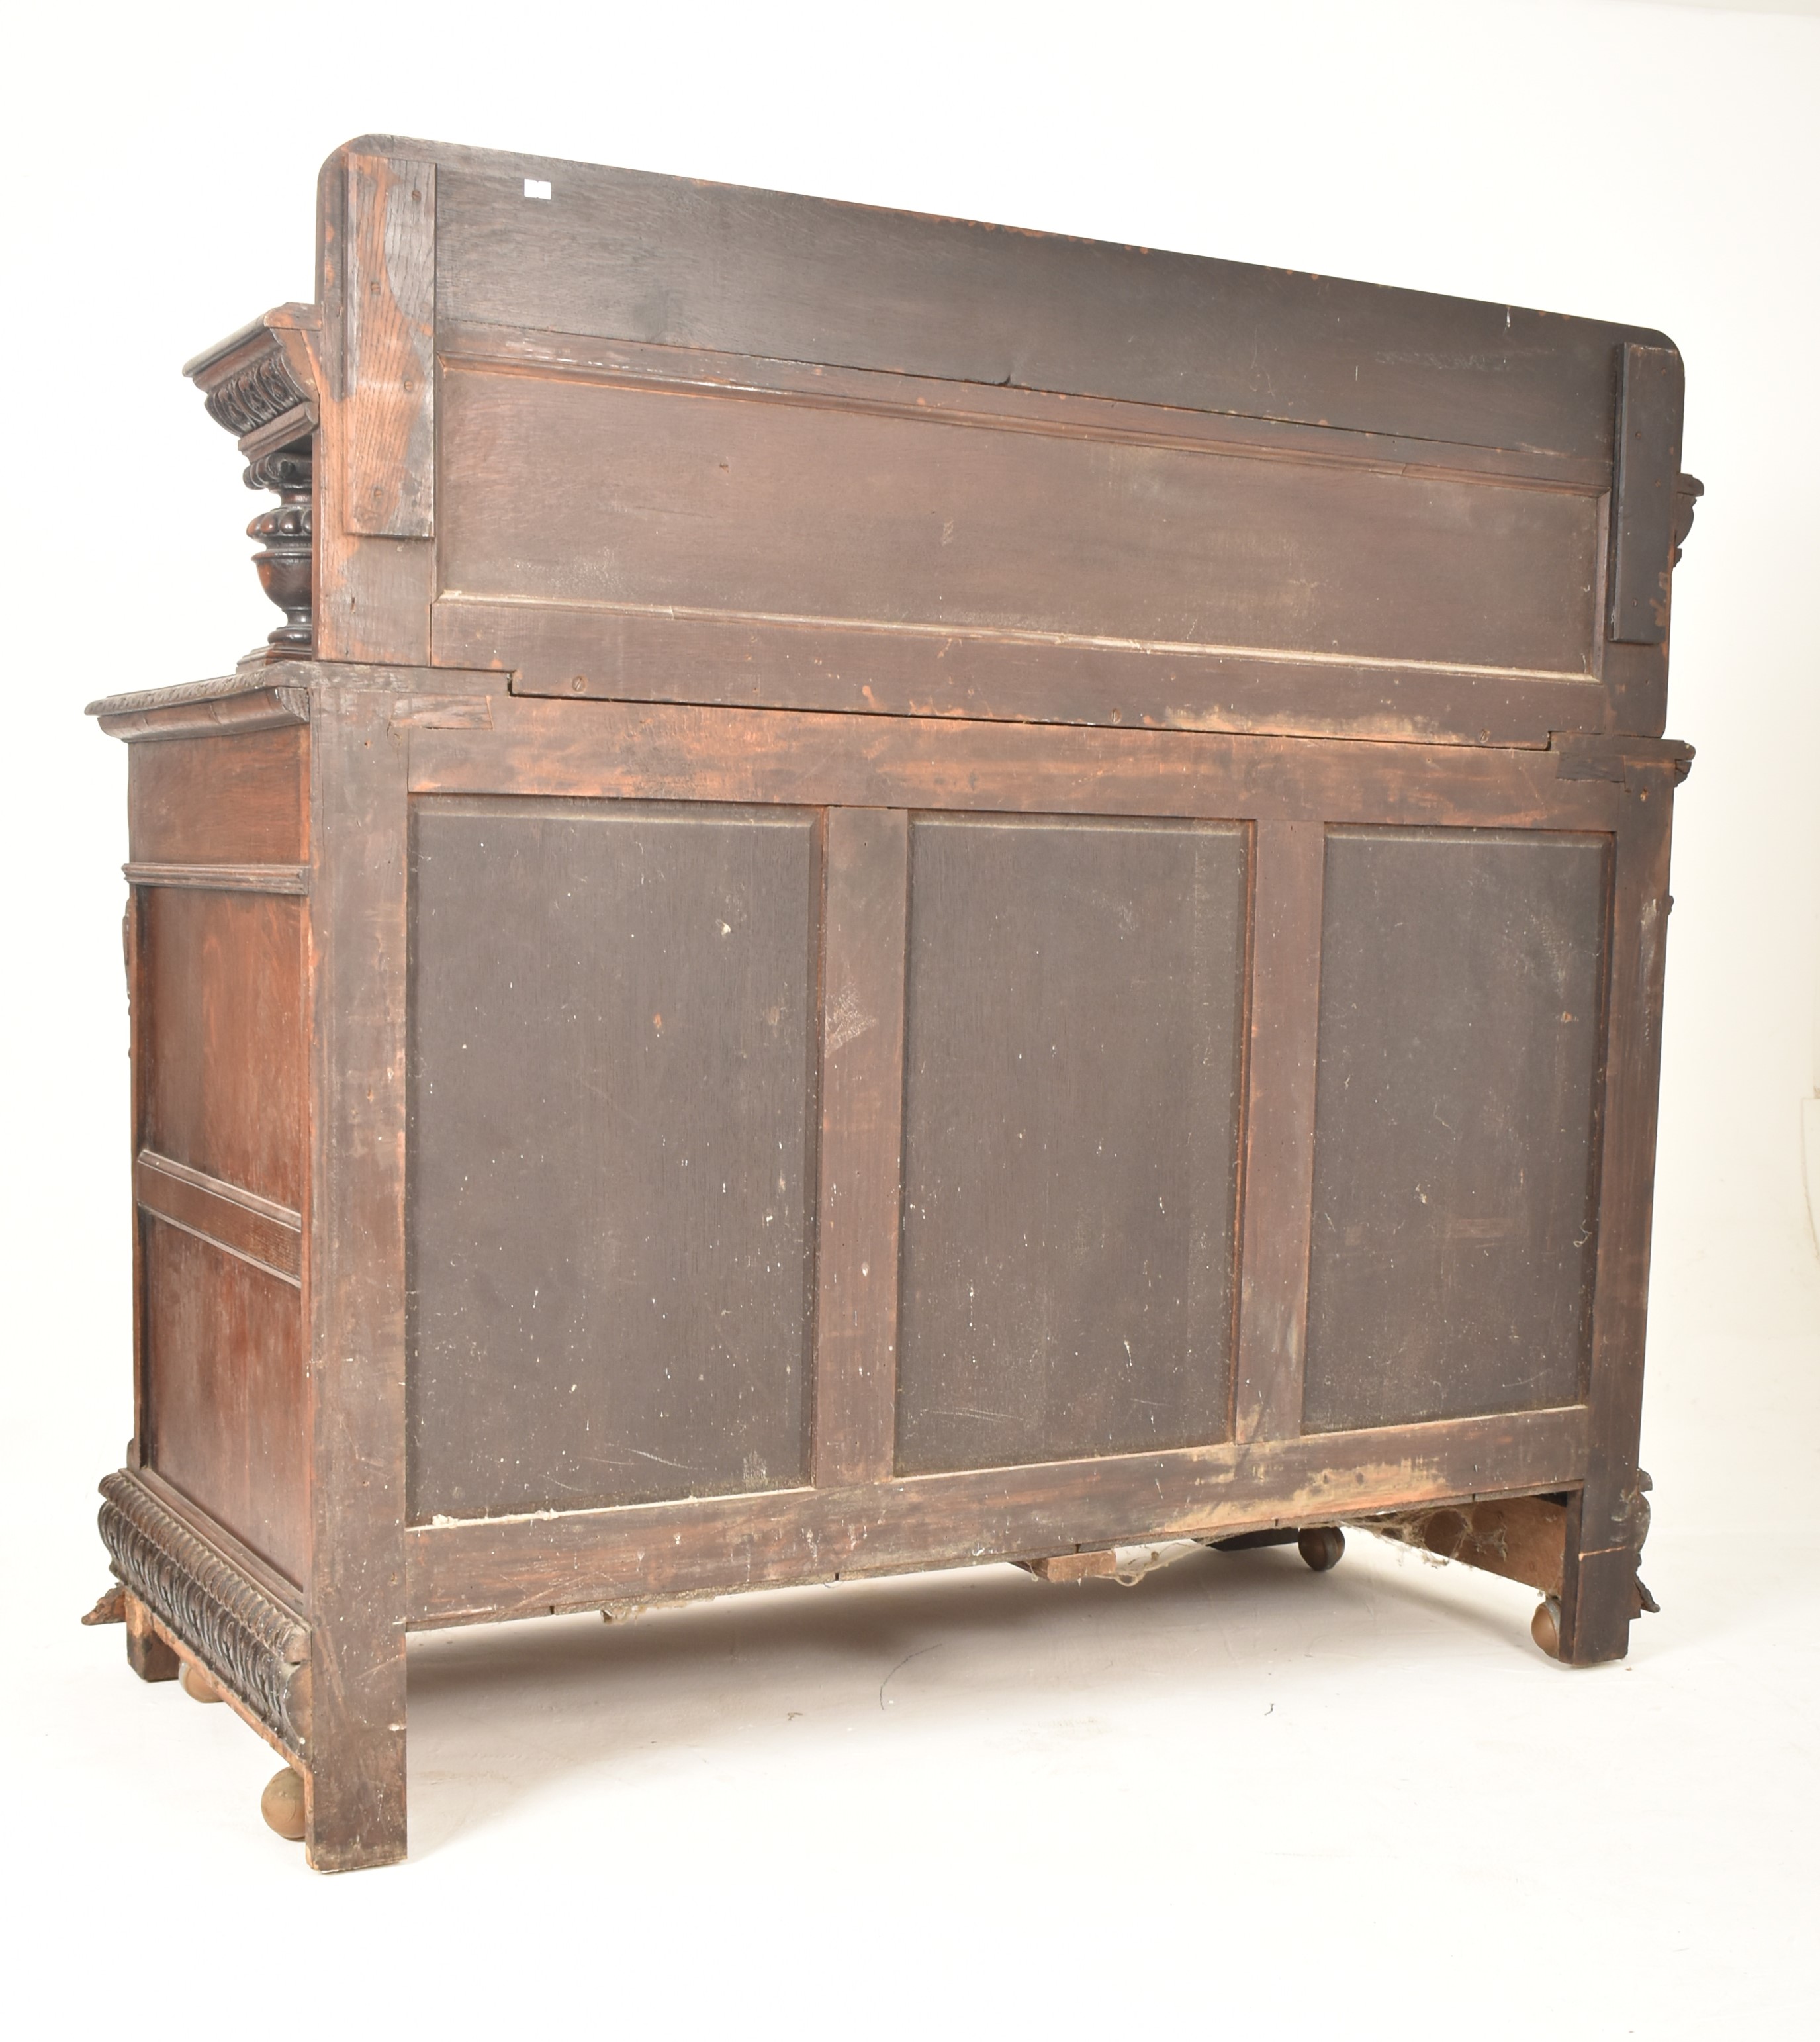 FLEMISH 19TH CENTURY CARVED OAK COURT CUPBOARD - Image 10 of 10